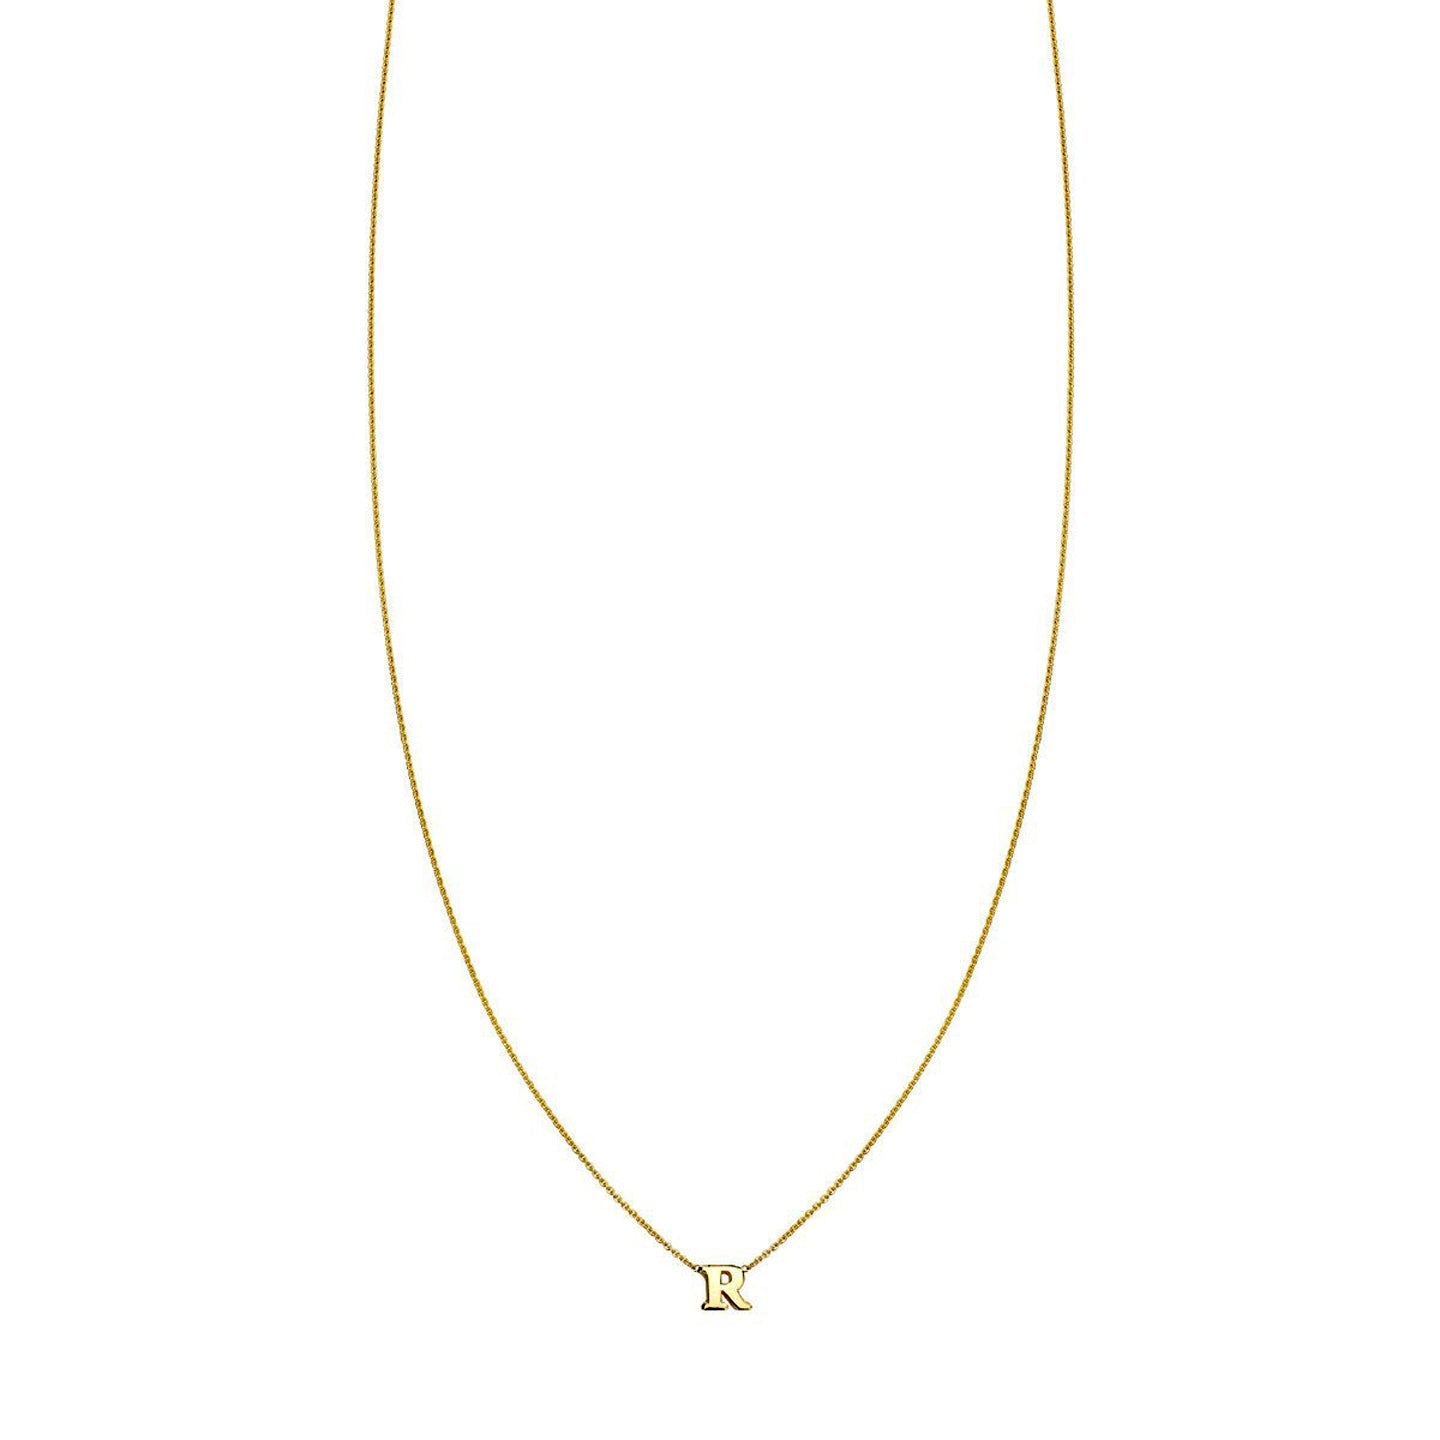 Gold Initial Letter Necklace - personalized women's jewelry